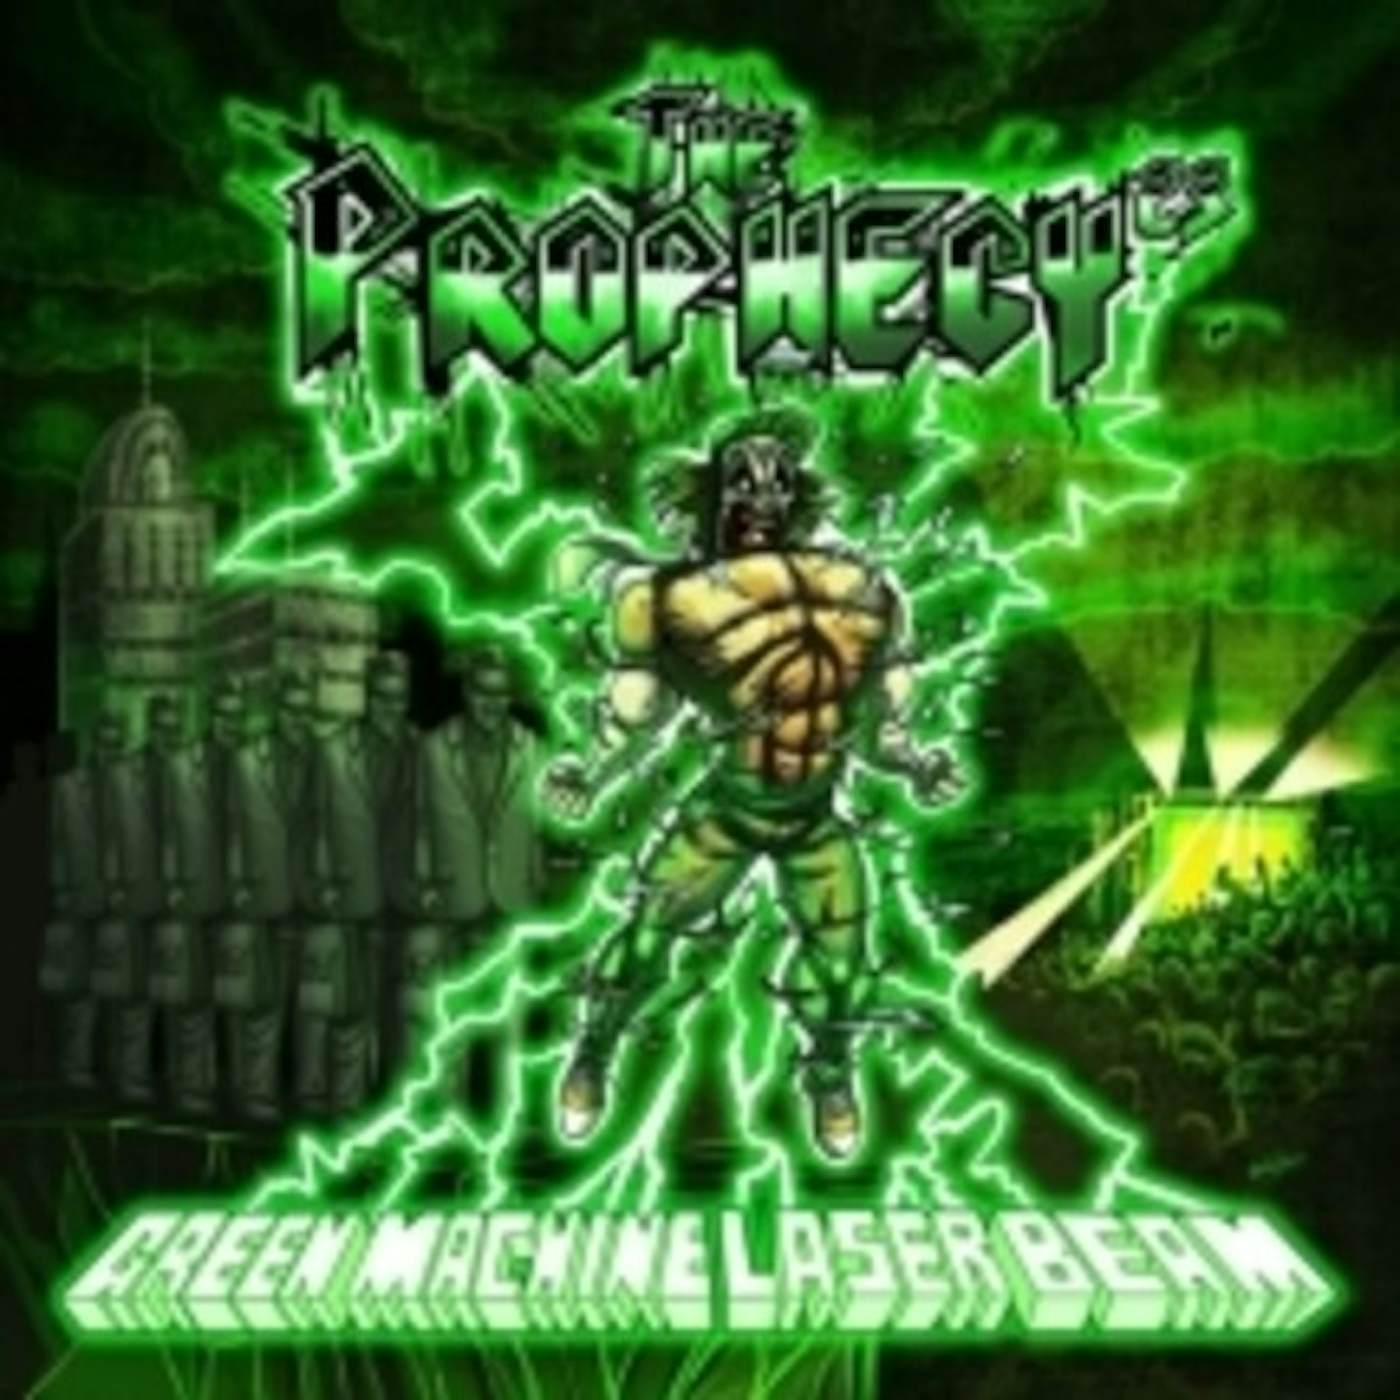 THE PROPHECY 23 GREEN MACHINE LASER BEAM CD